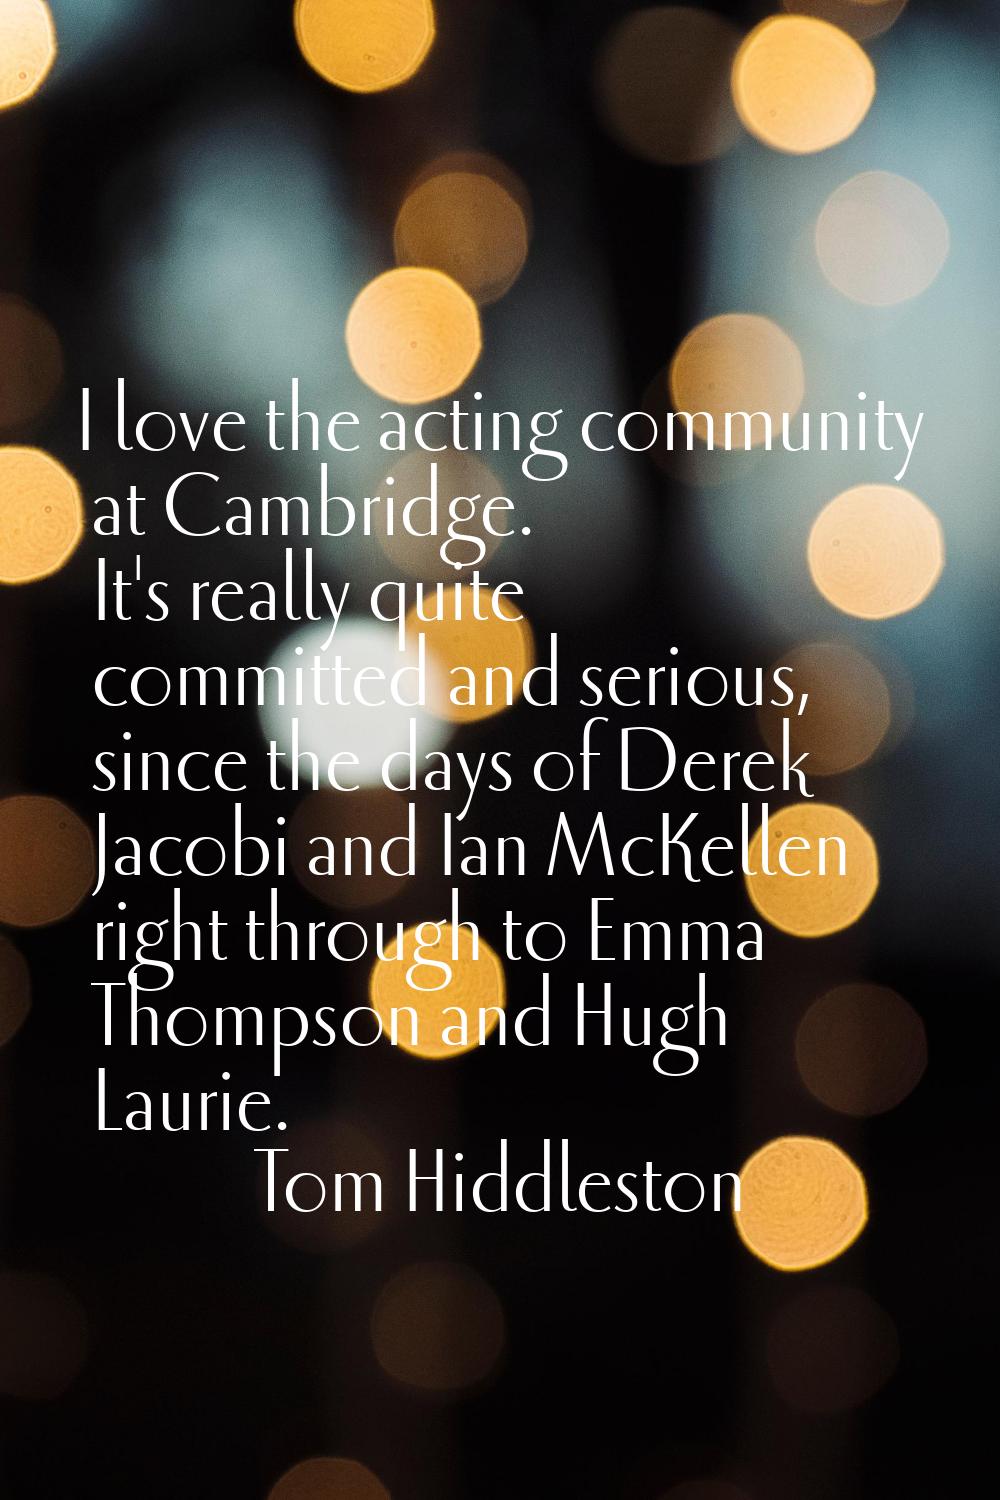 I love the acting community at Cambridge. It's really quite committed and serious, since the days o